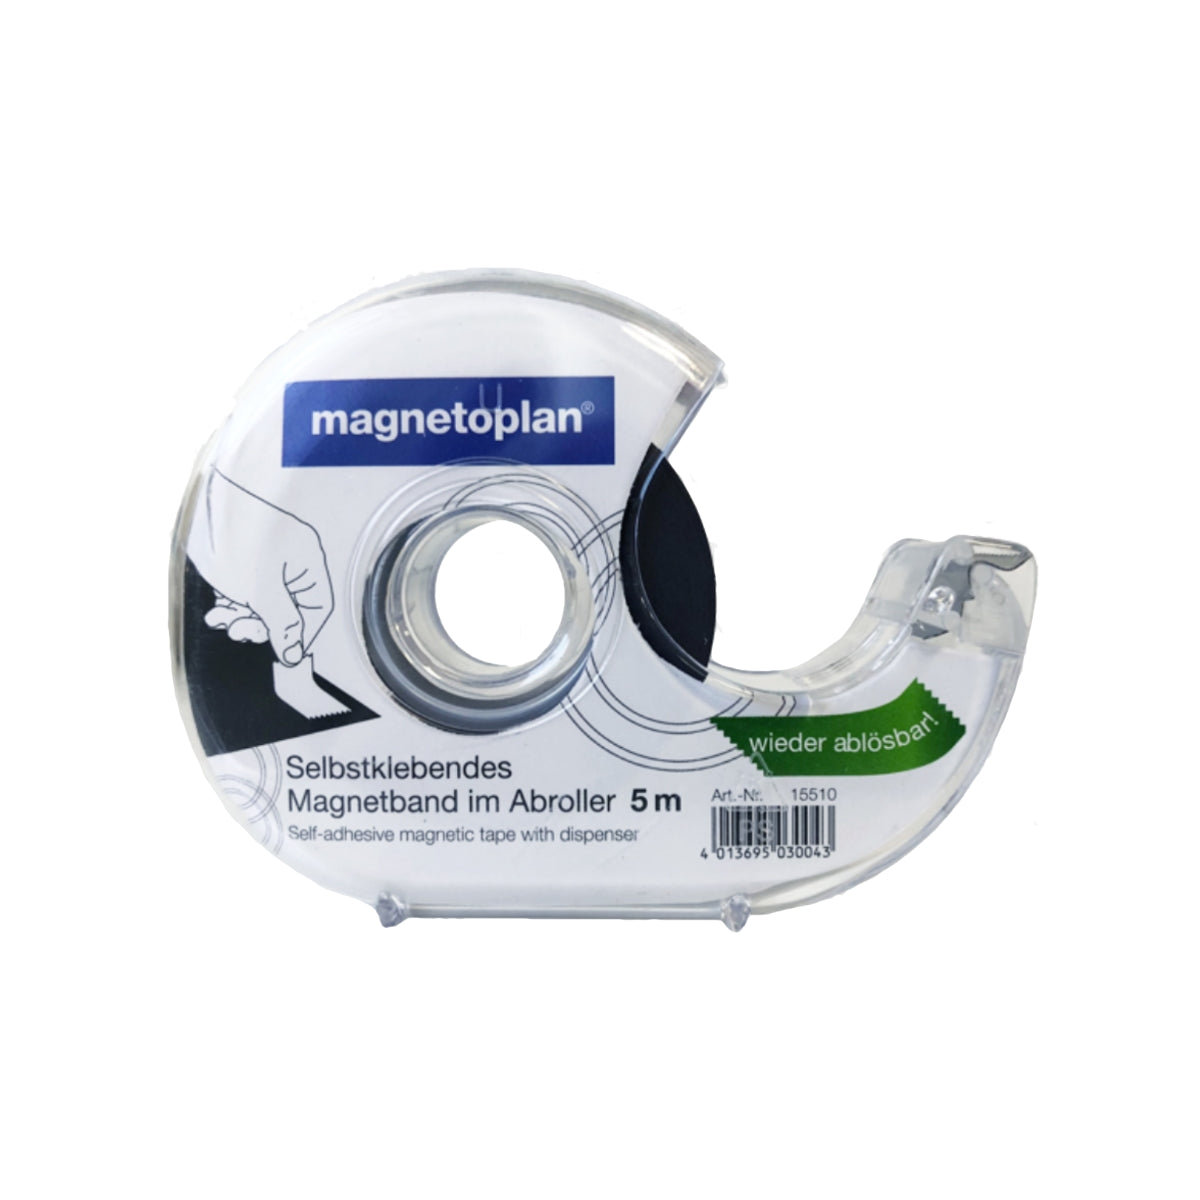 Magnetoplan Magnetic Tape with Dispenser, 19mm x 5m